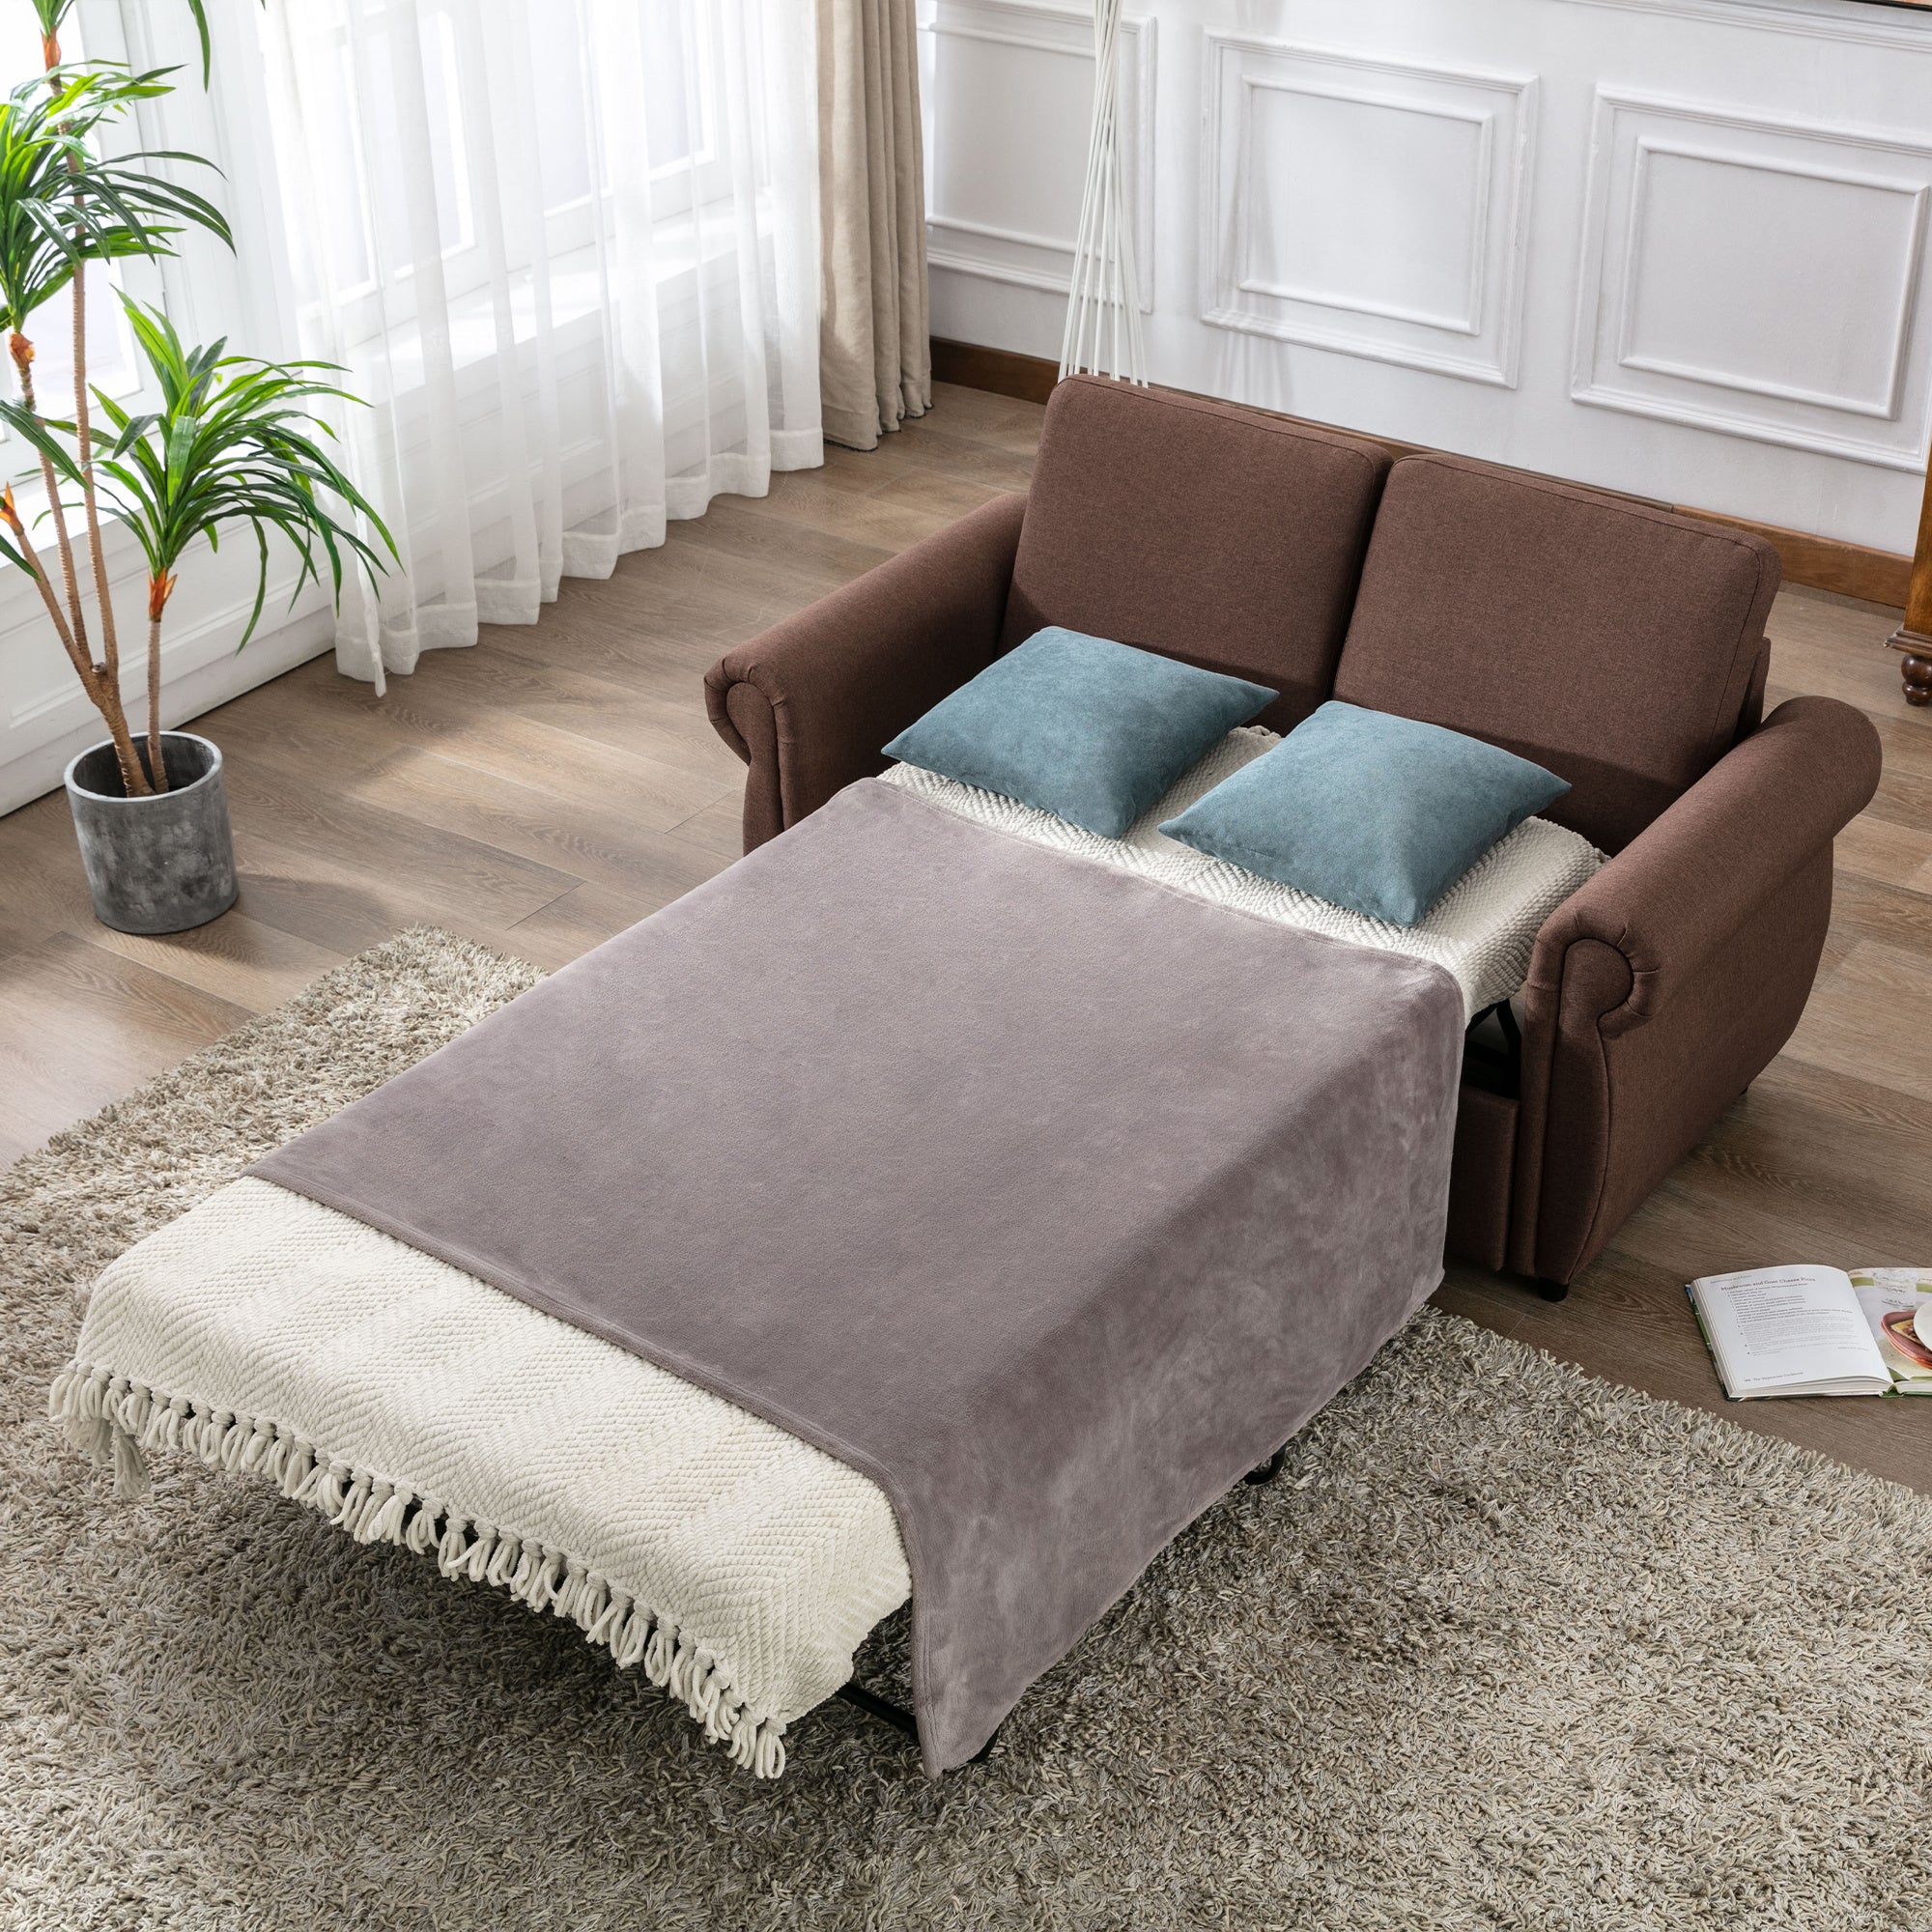 57.5" Orisfur Pull Out Sofa Bed Loveseat Sleeper with Twin Size Memory Mattress for Living Room Spaces, Brown